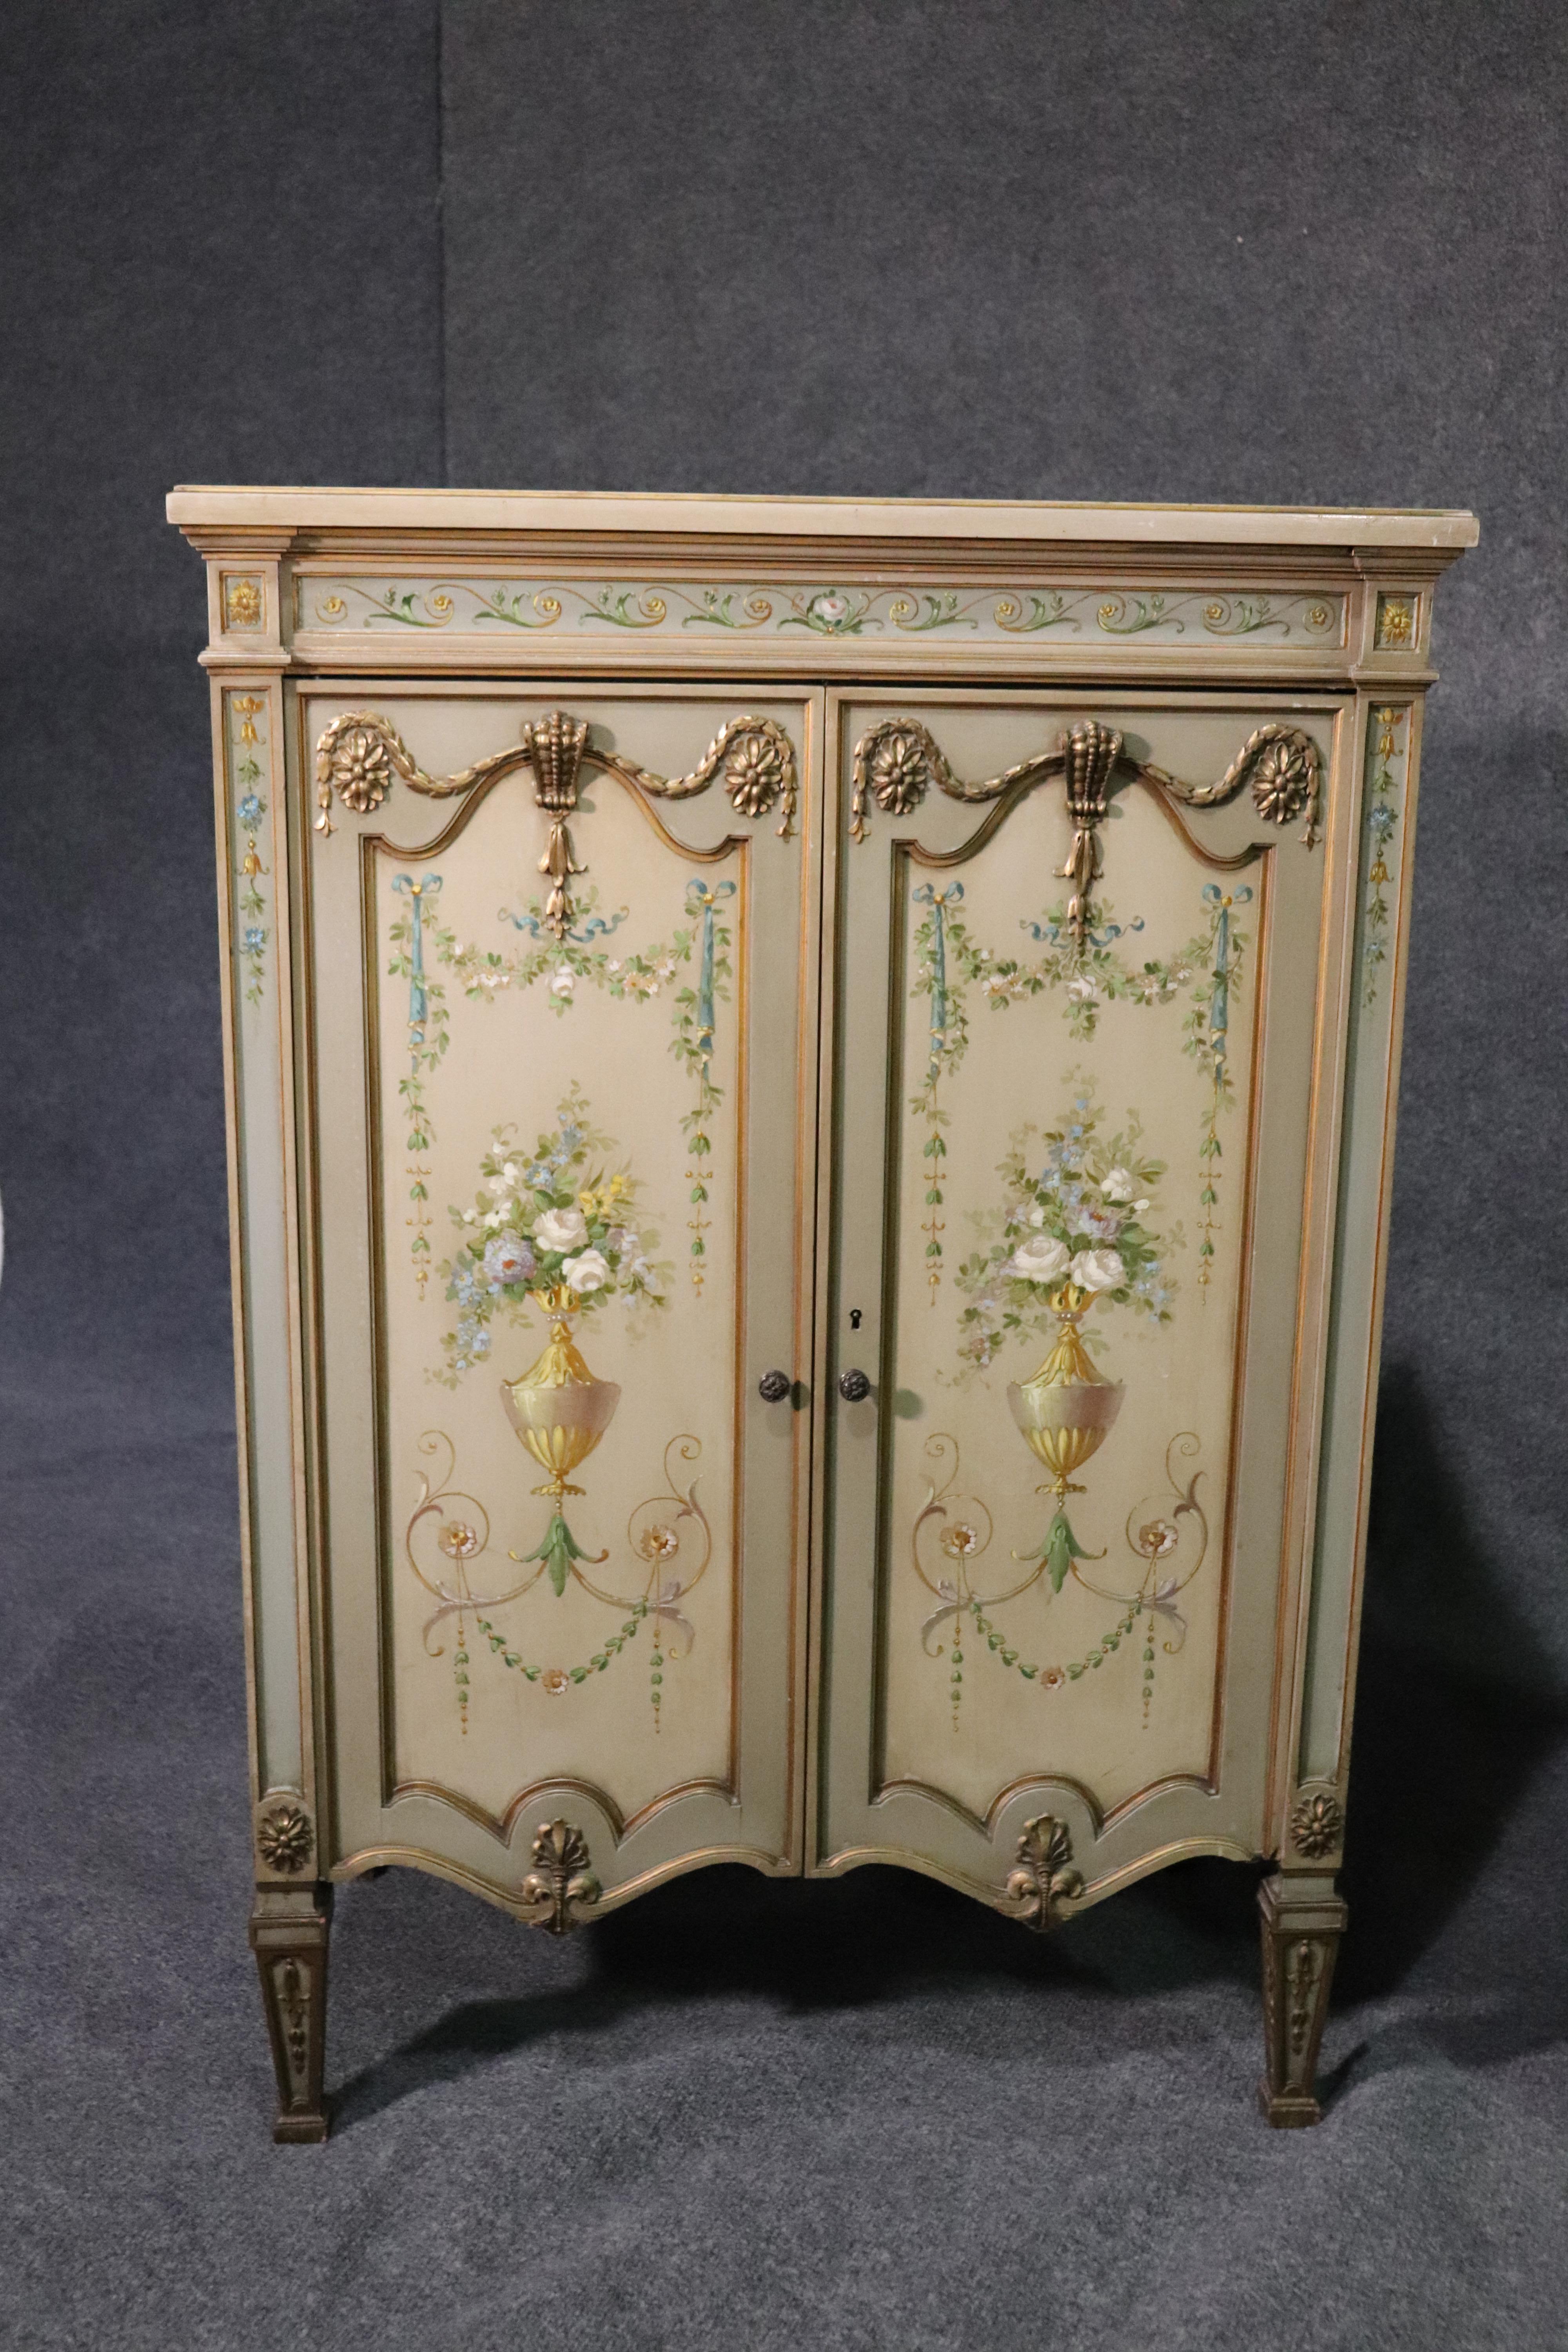 This is a fine pair of French carved side cabinets. Perfect for an entryway or foyer, these cabinets are very rare and unique and have superb details including exceptional paint decorated doors and carved details. The tops are good too save for one